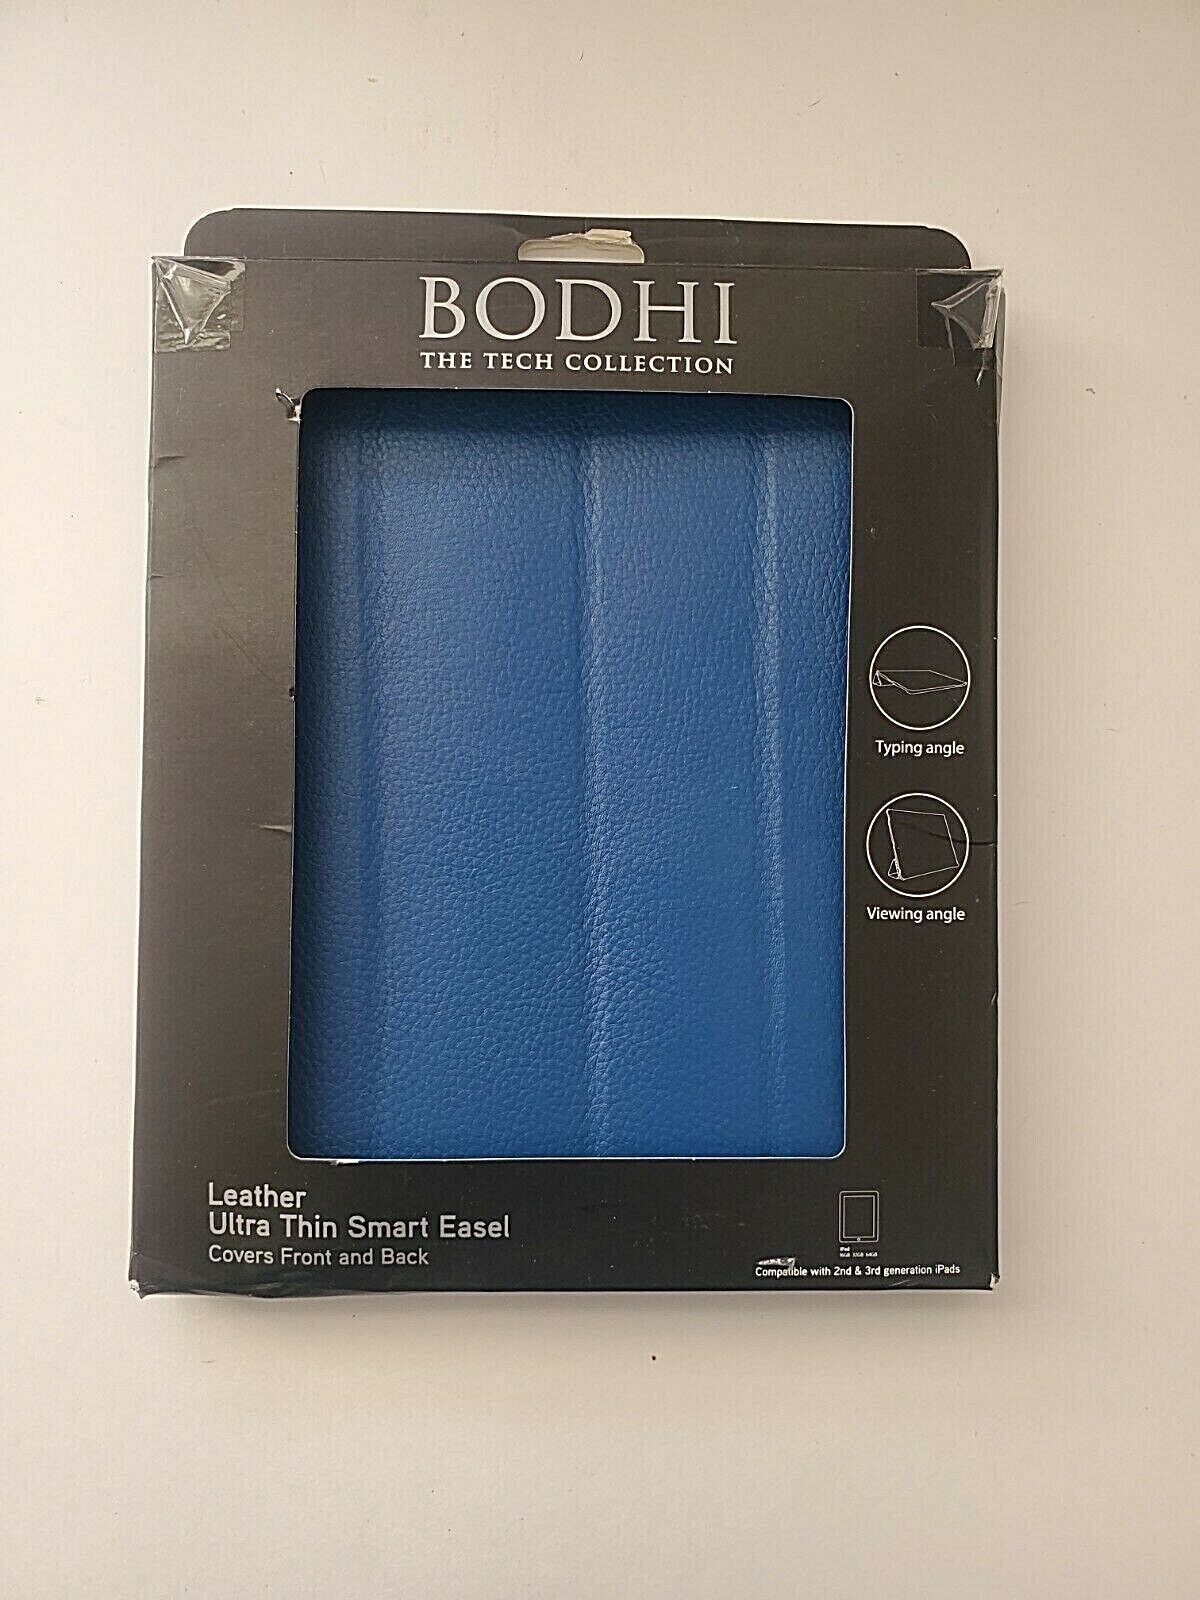 Bodhi Tech Collection Leather IPad 2 and 3 gen Ultra Thin Smart Easel NIB Saddle